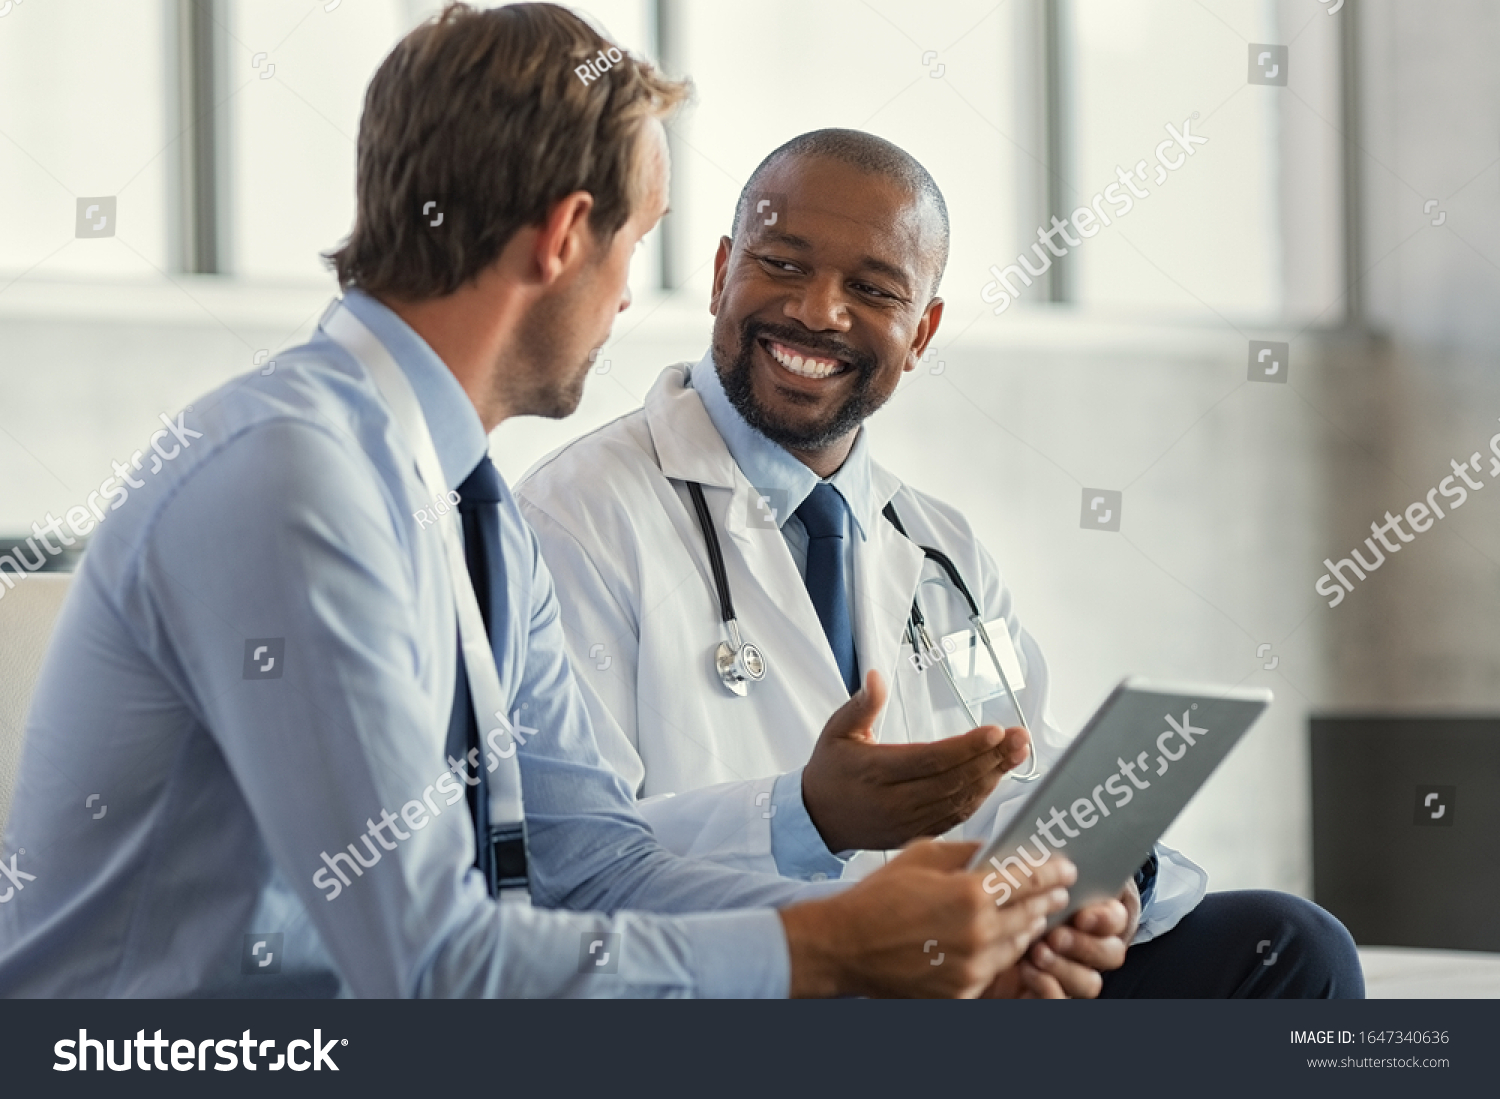 Two mature smiling doctors having discussion about patient diagnosis, holding digital tablet. Representative pharmaceutical discussing case after positive result with happy doctor about new medicine. #1647340636